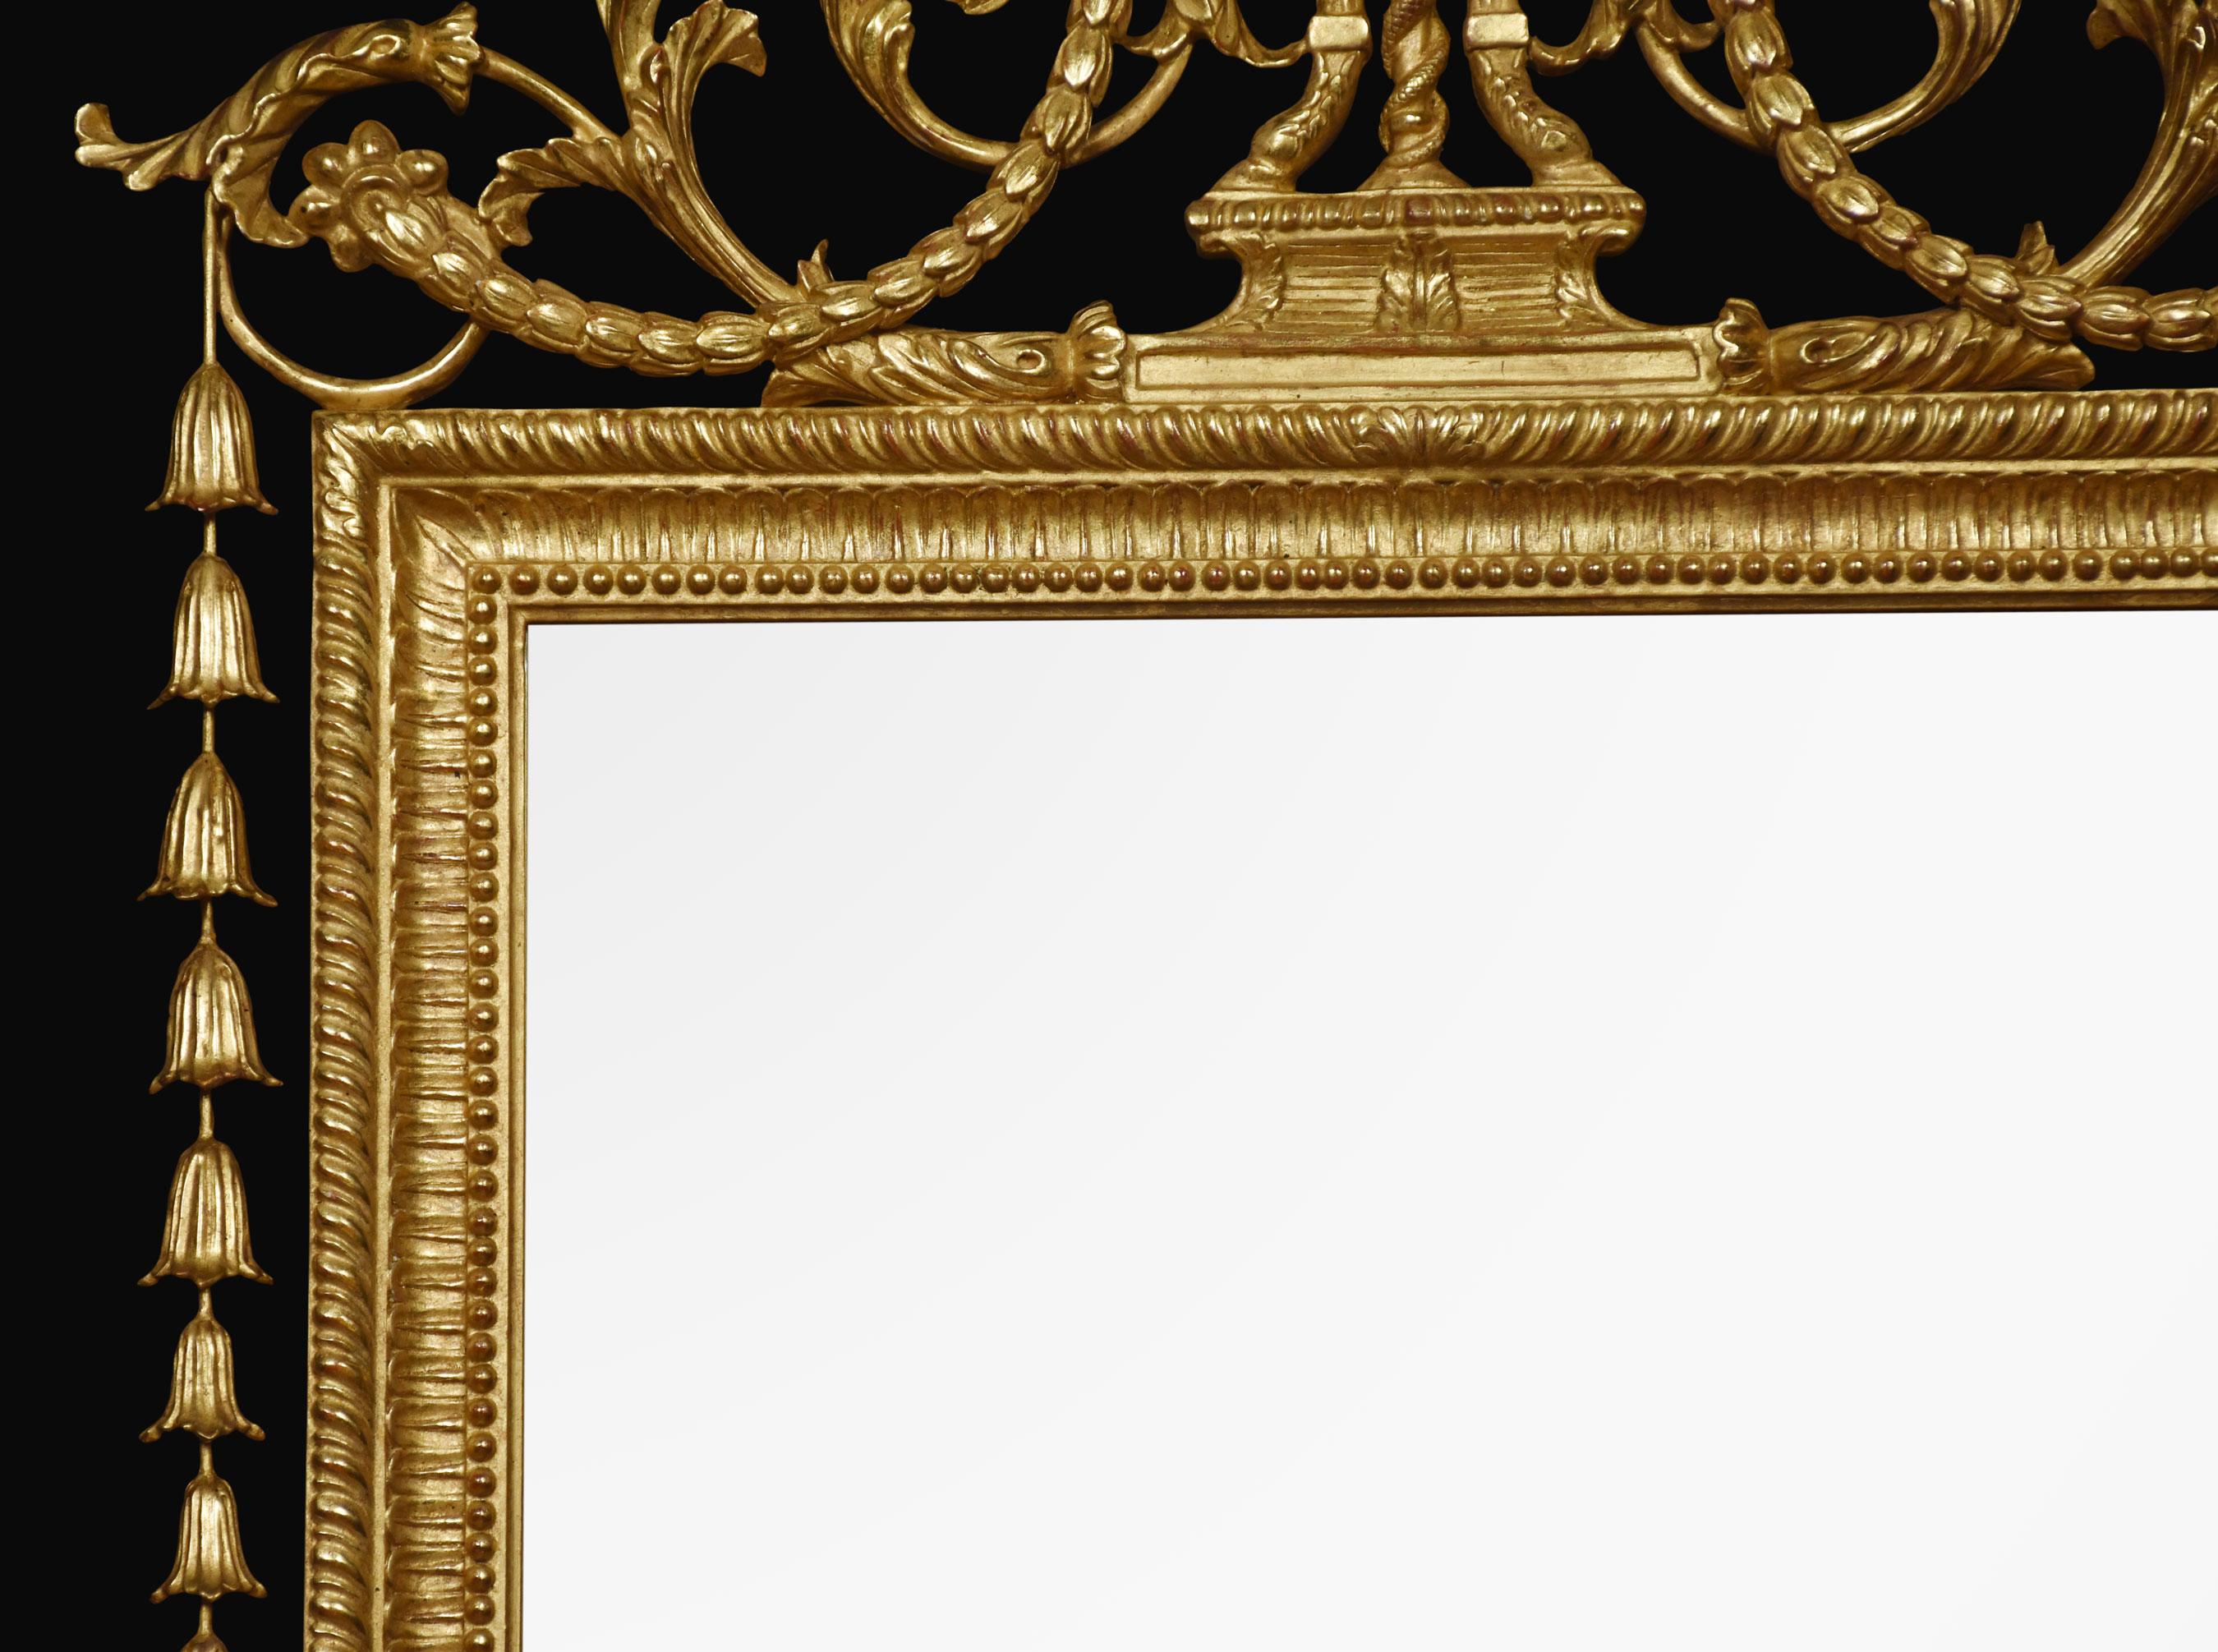 Large pair of 18th century-style giltwood wall mirrors with acanthus and flaming urn cresting, cavetto molded frames and bell flower sides, surrounding the original mirror plate.
Dimensions
Height 69 inches
Width 33.5 inches
Depth 2 inches.